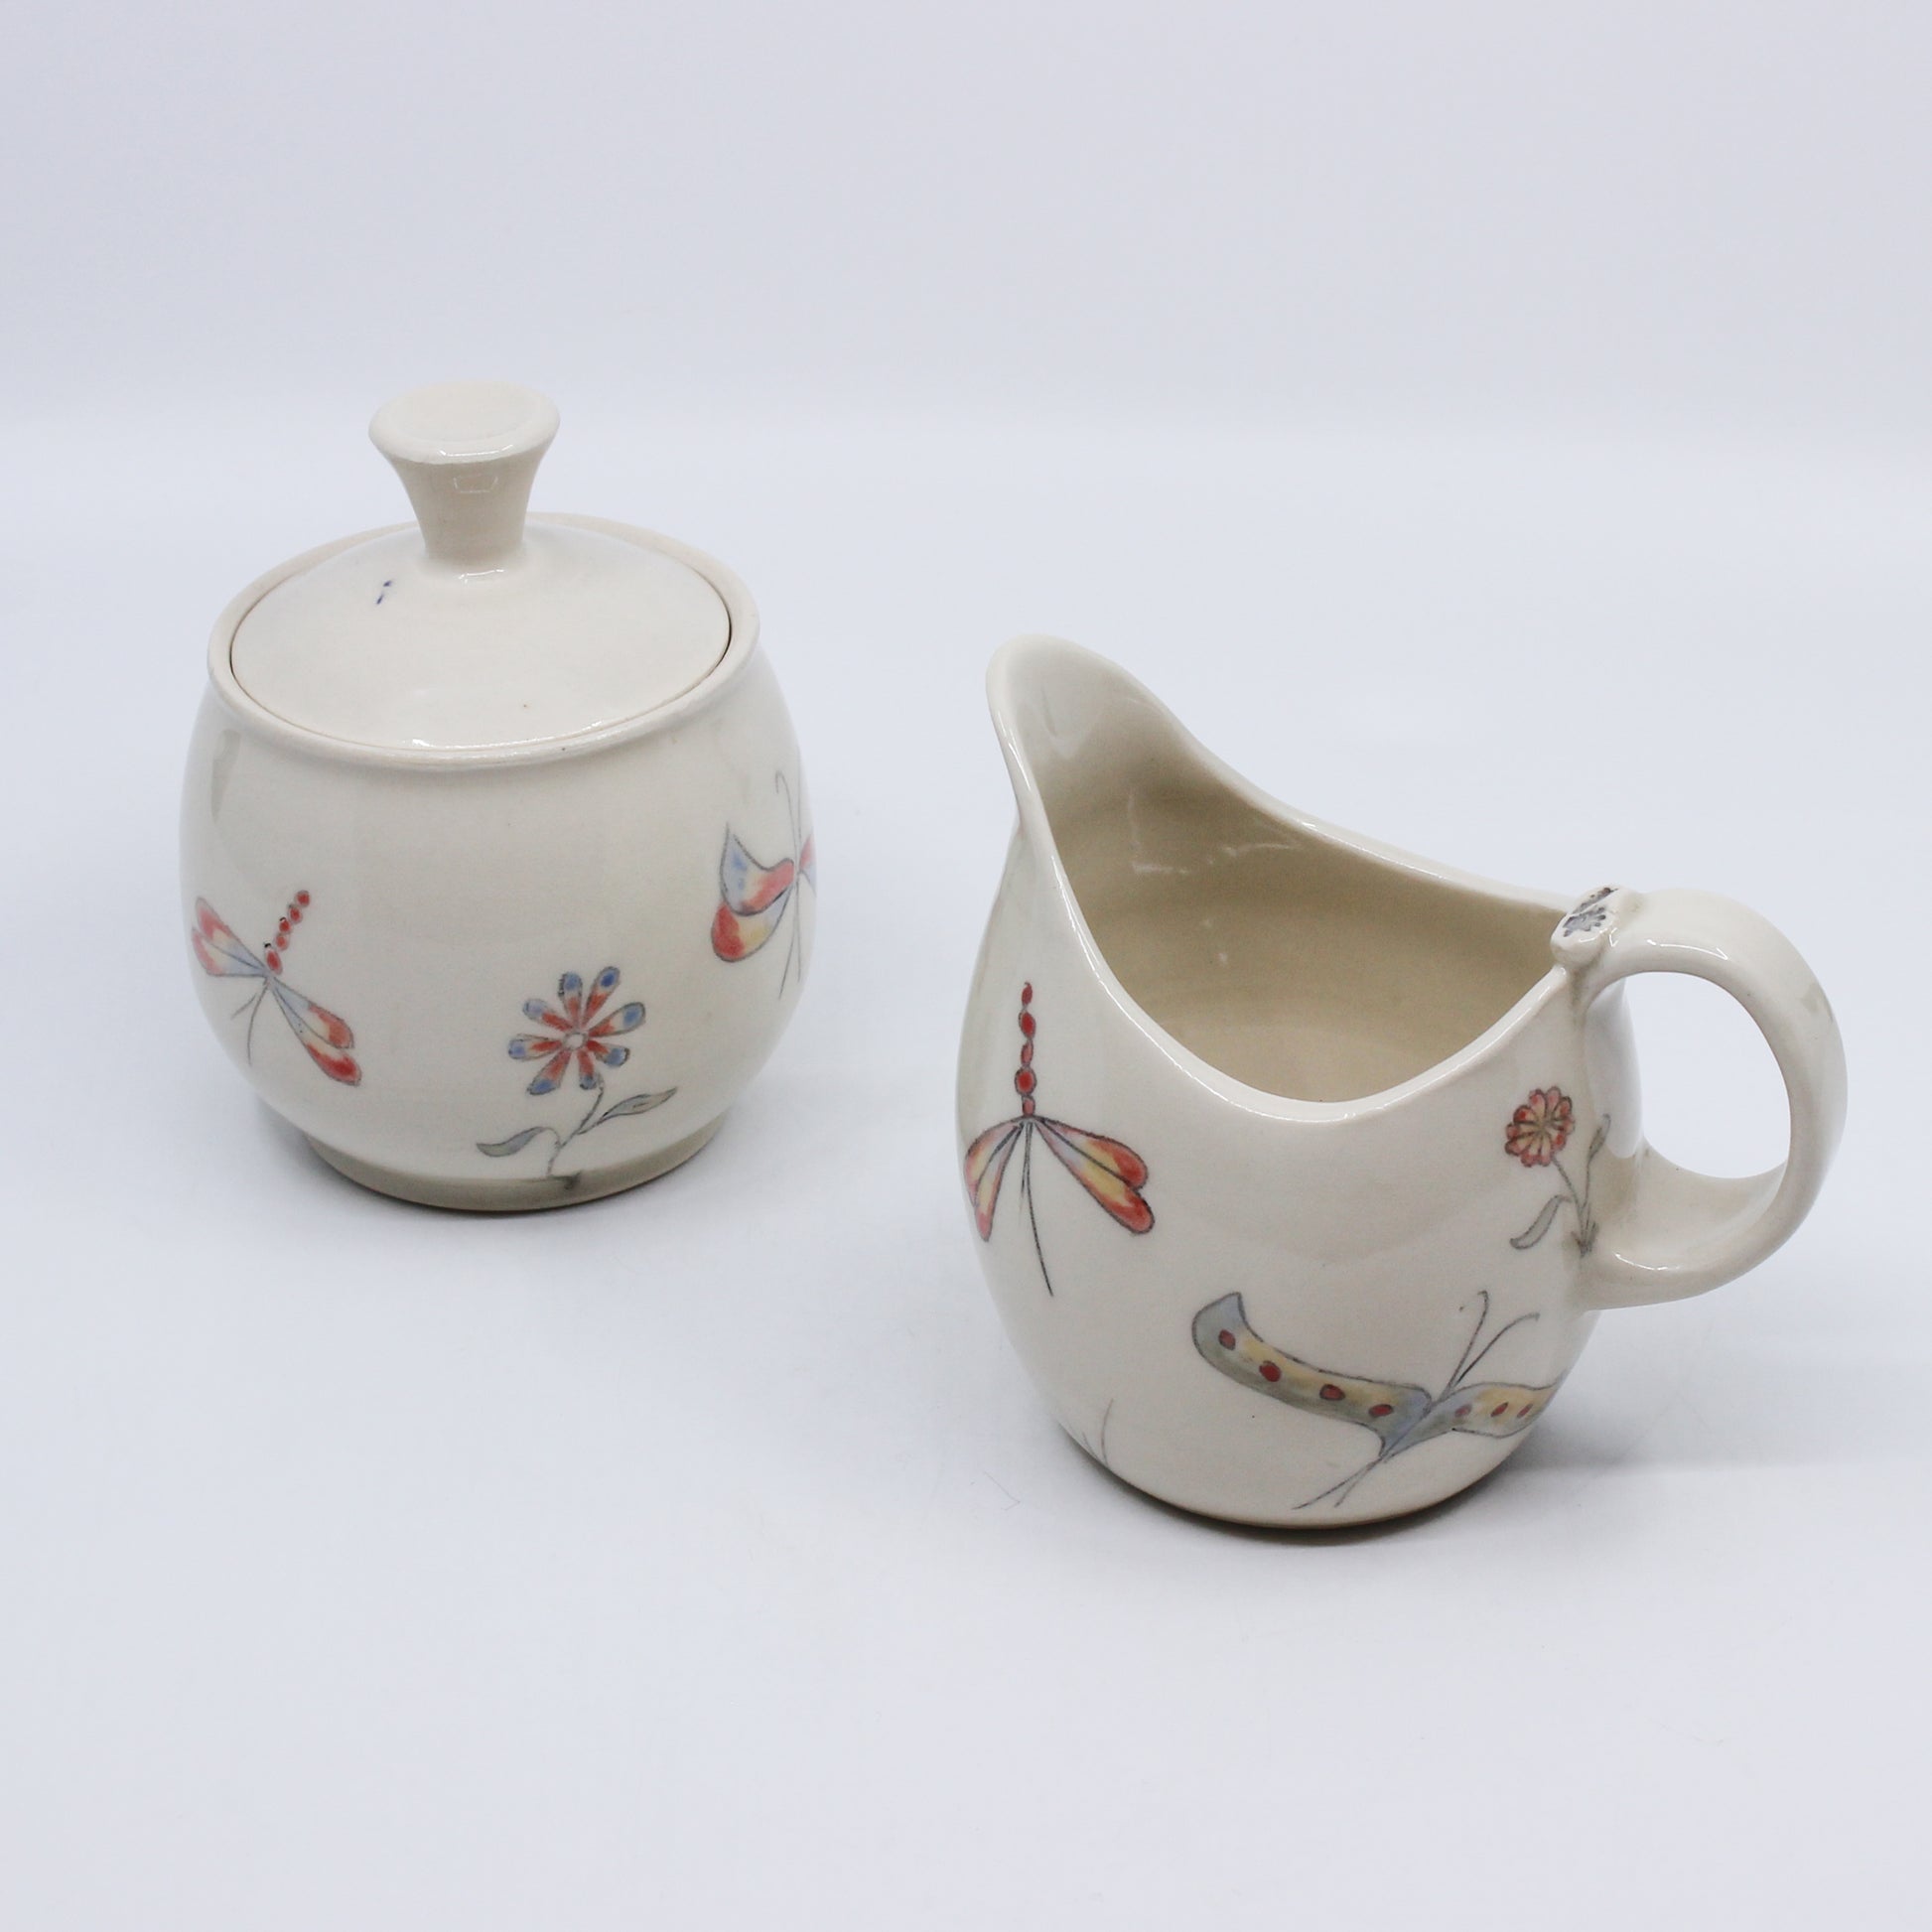 Alternate image of creamer and sugar bowl with hand painted insects and flowers